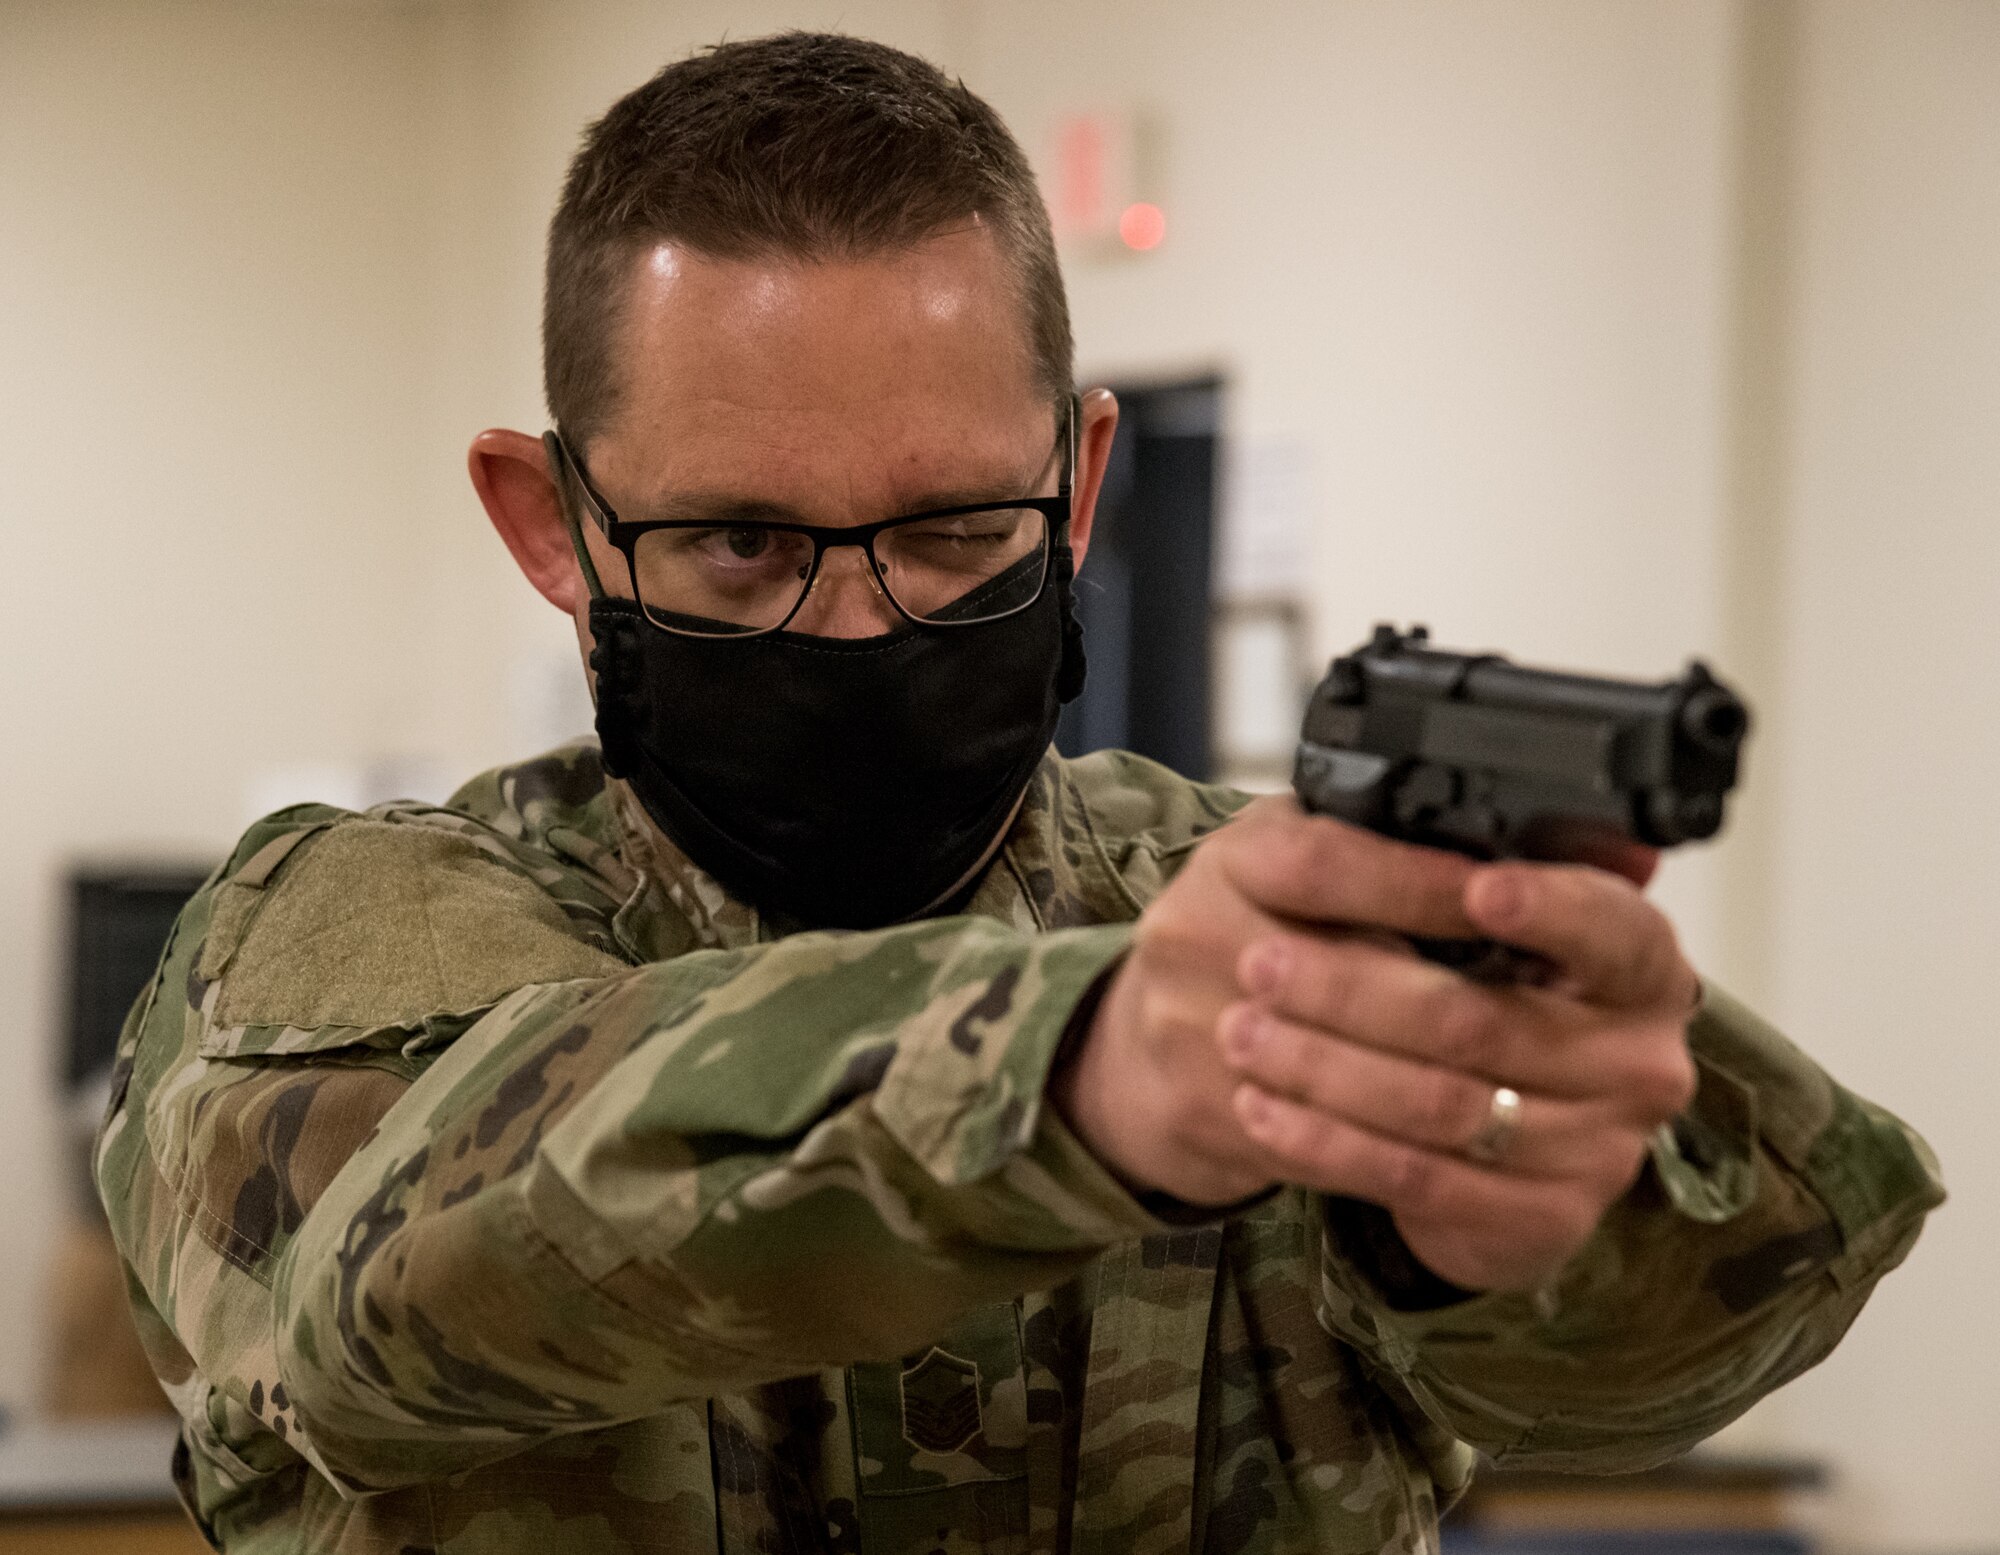 Master Sgt. Jeremy Stupperich, 436th Airlift Wing command post senior emergency actions controller, looks at a target through the M9 sight during Combat Arms Training and Maintenance class May 13, 2020, at Dover Air Force Base, Delaware. Stupperich and other CATM students wore masks whenever six feet of separation could not be maintained, whether in the classroom or on the firing range. A shelter-in-place order was issued in mid-March to help mitigate the spread of COVID-19. (U.S. Air Force photo by Roland Balik)